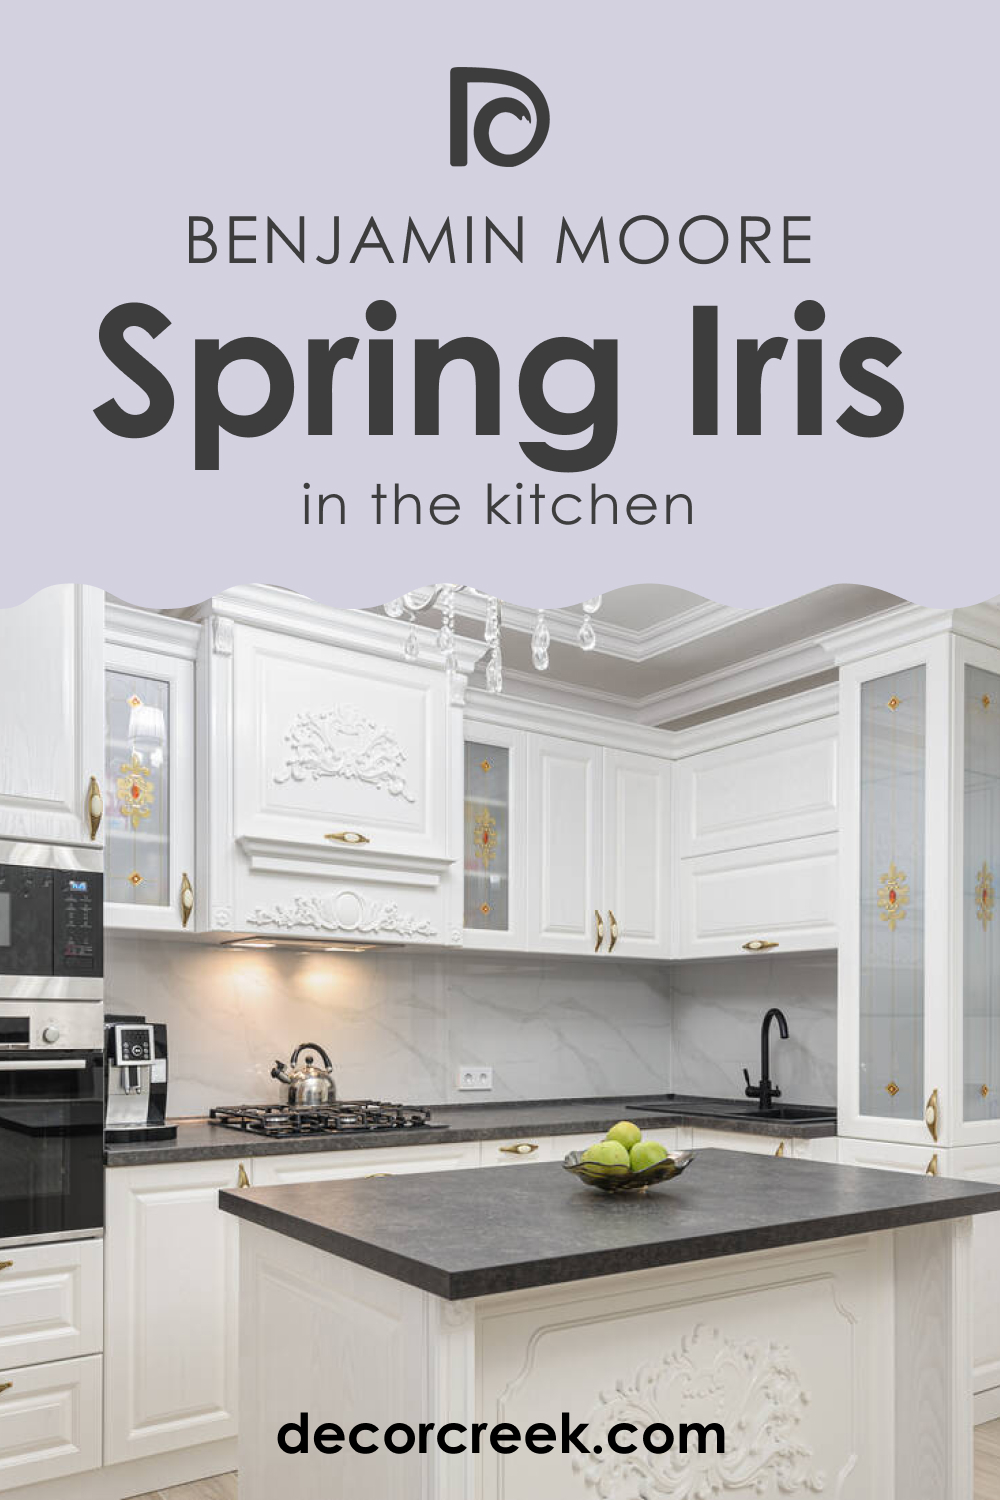 How to Use Spring Iris 1402 in the Kitchen?